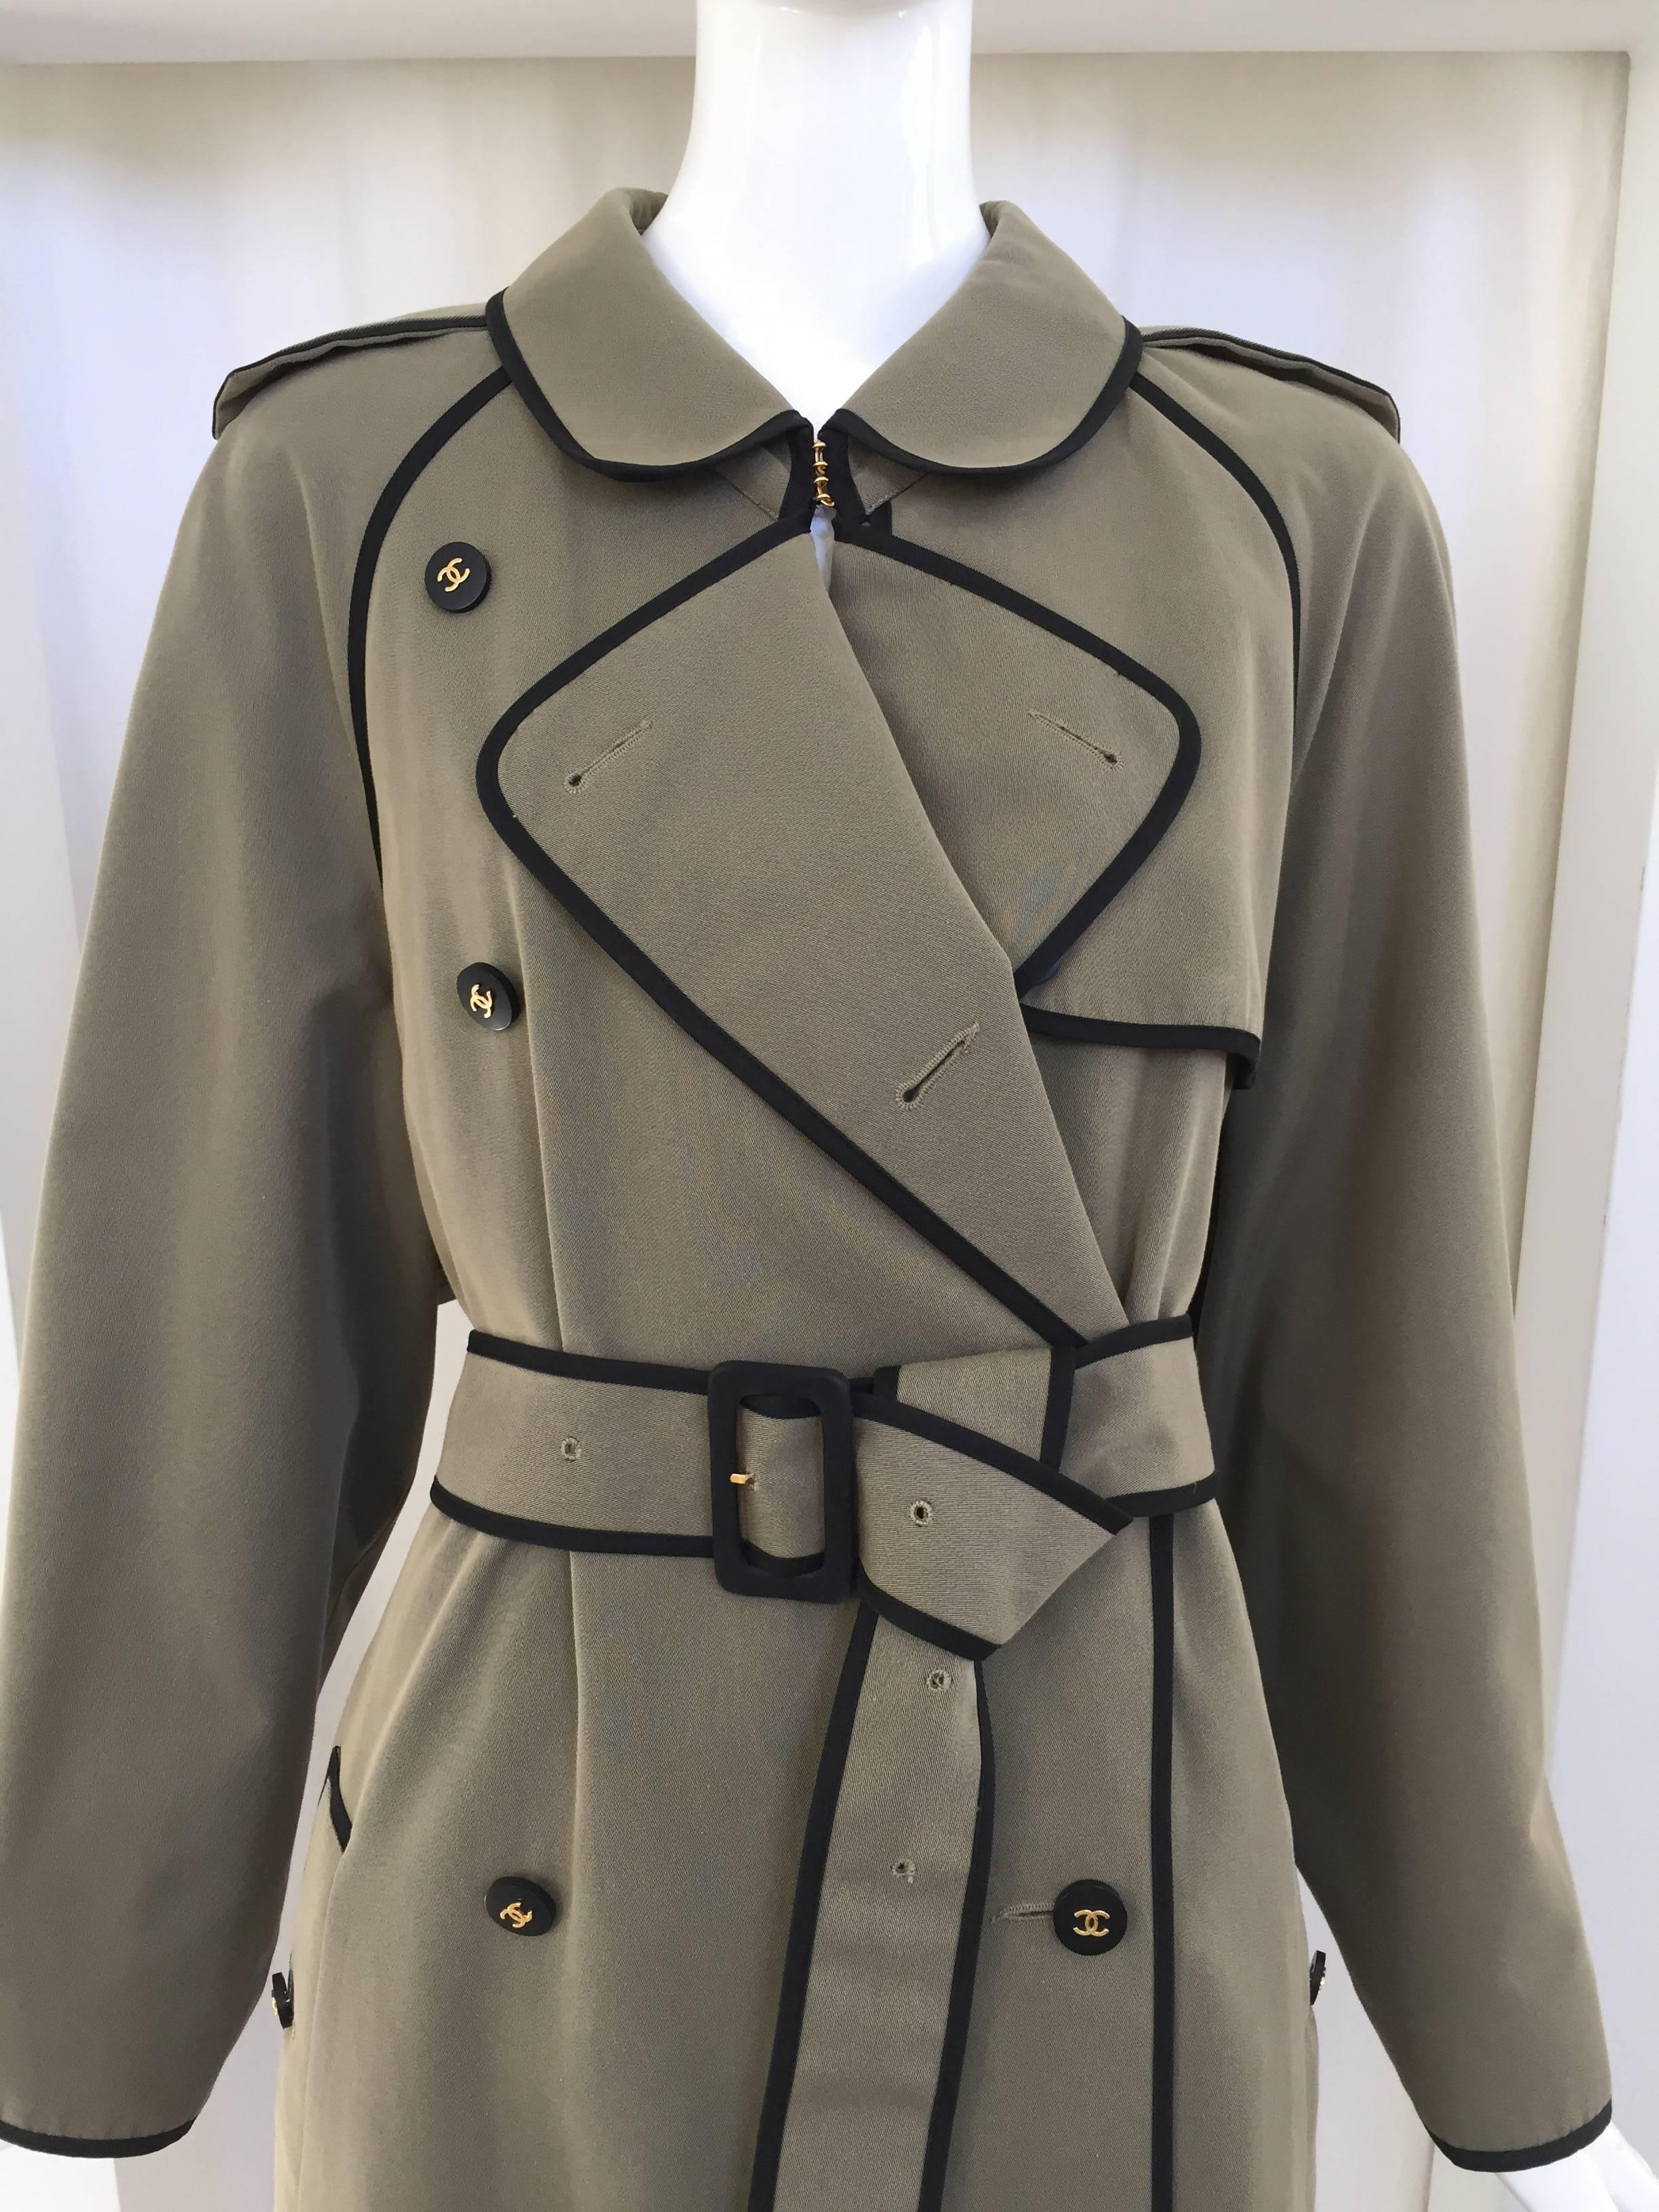 Black 1980s CHANEL olive green cotton trench coat